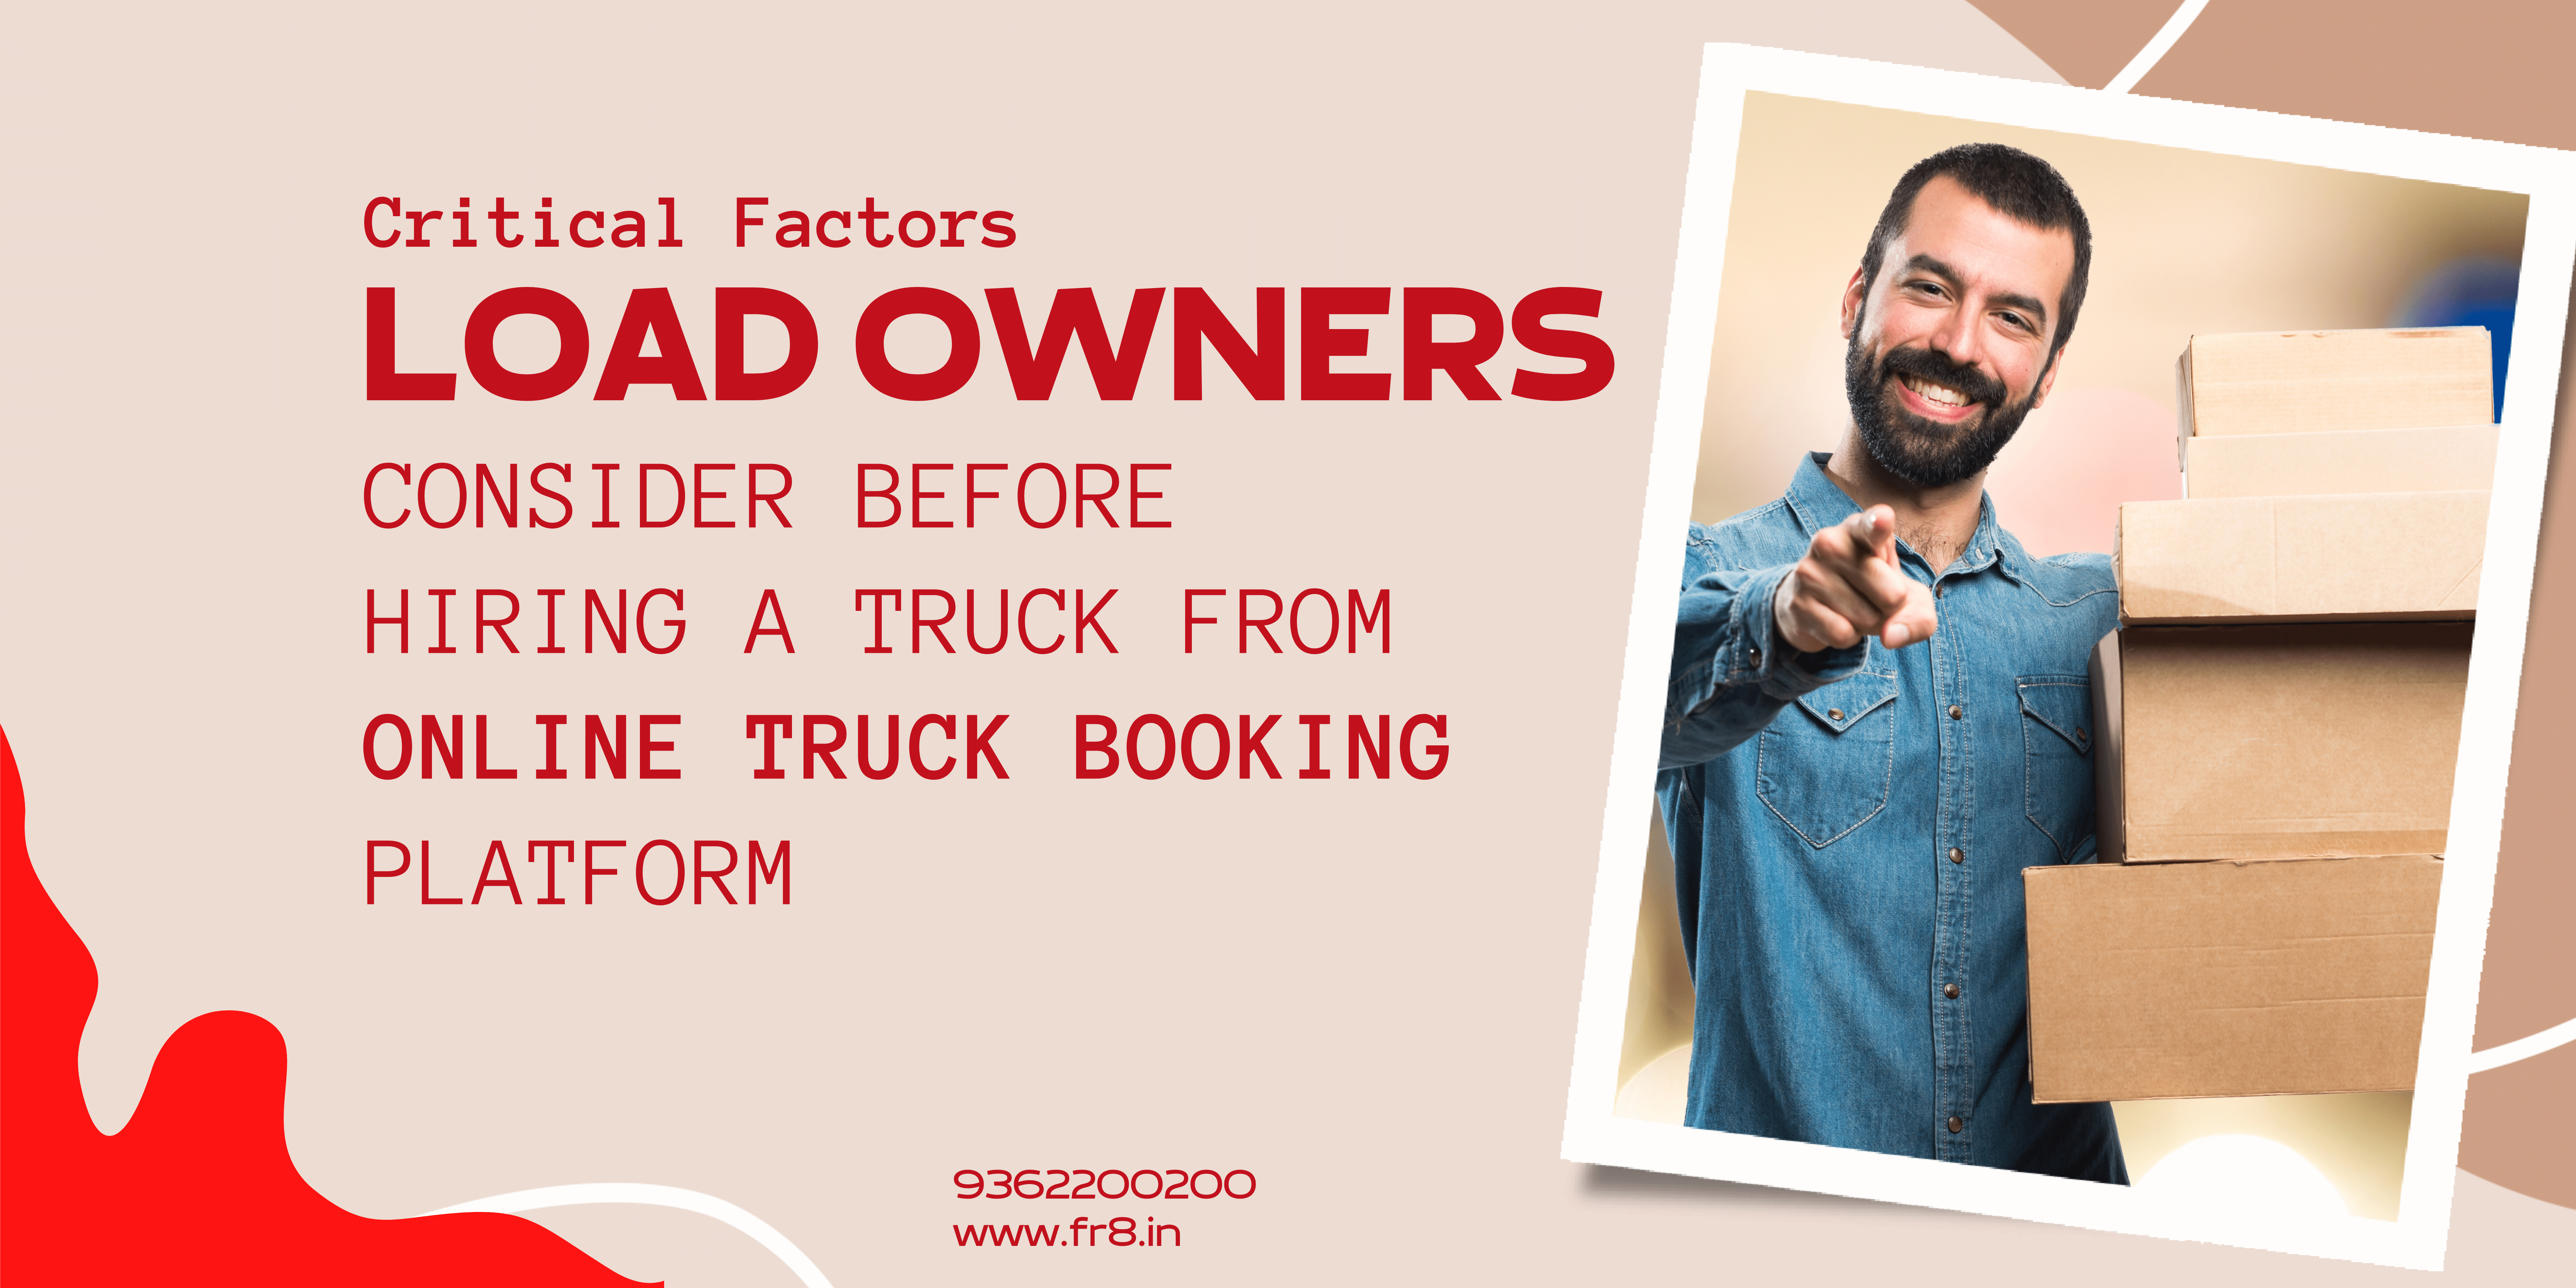 What critical factors should load owners consider before hiring a truck from an online truck booking platform?